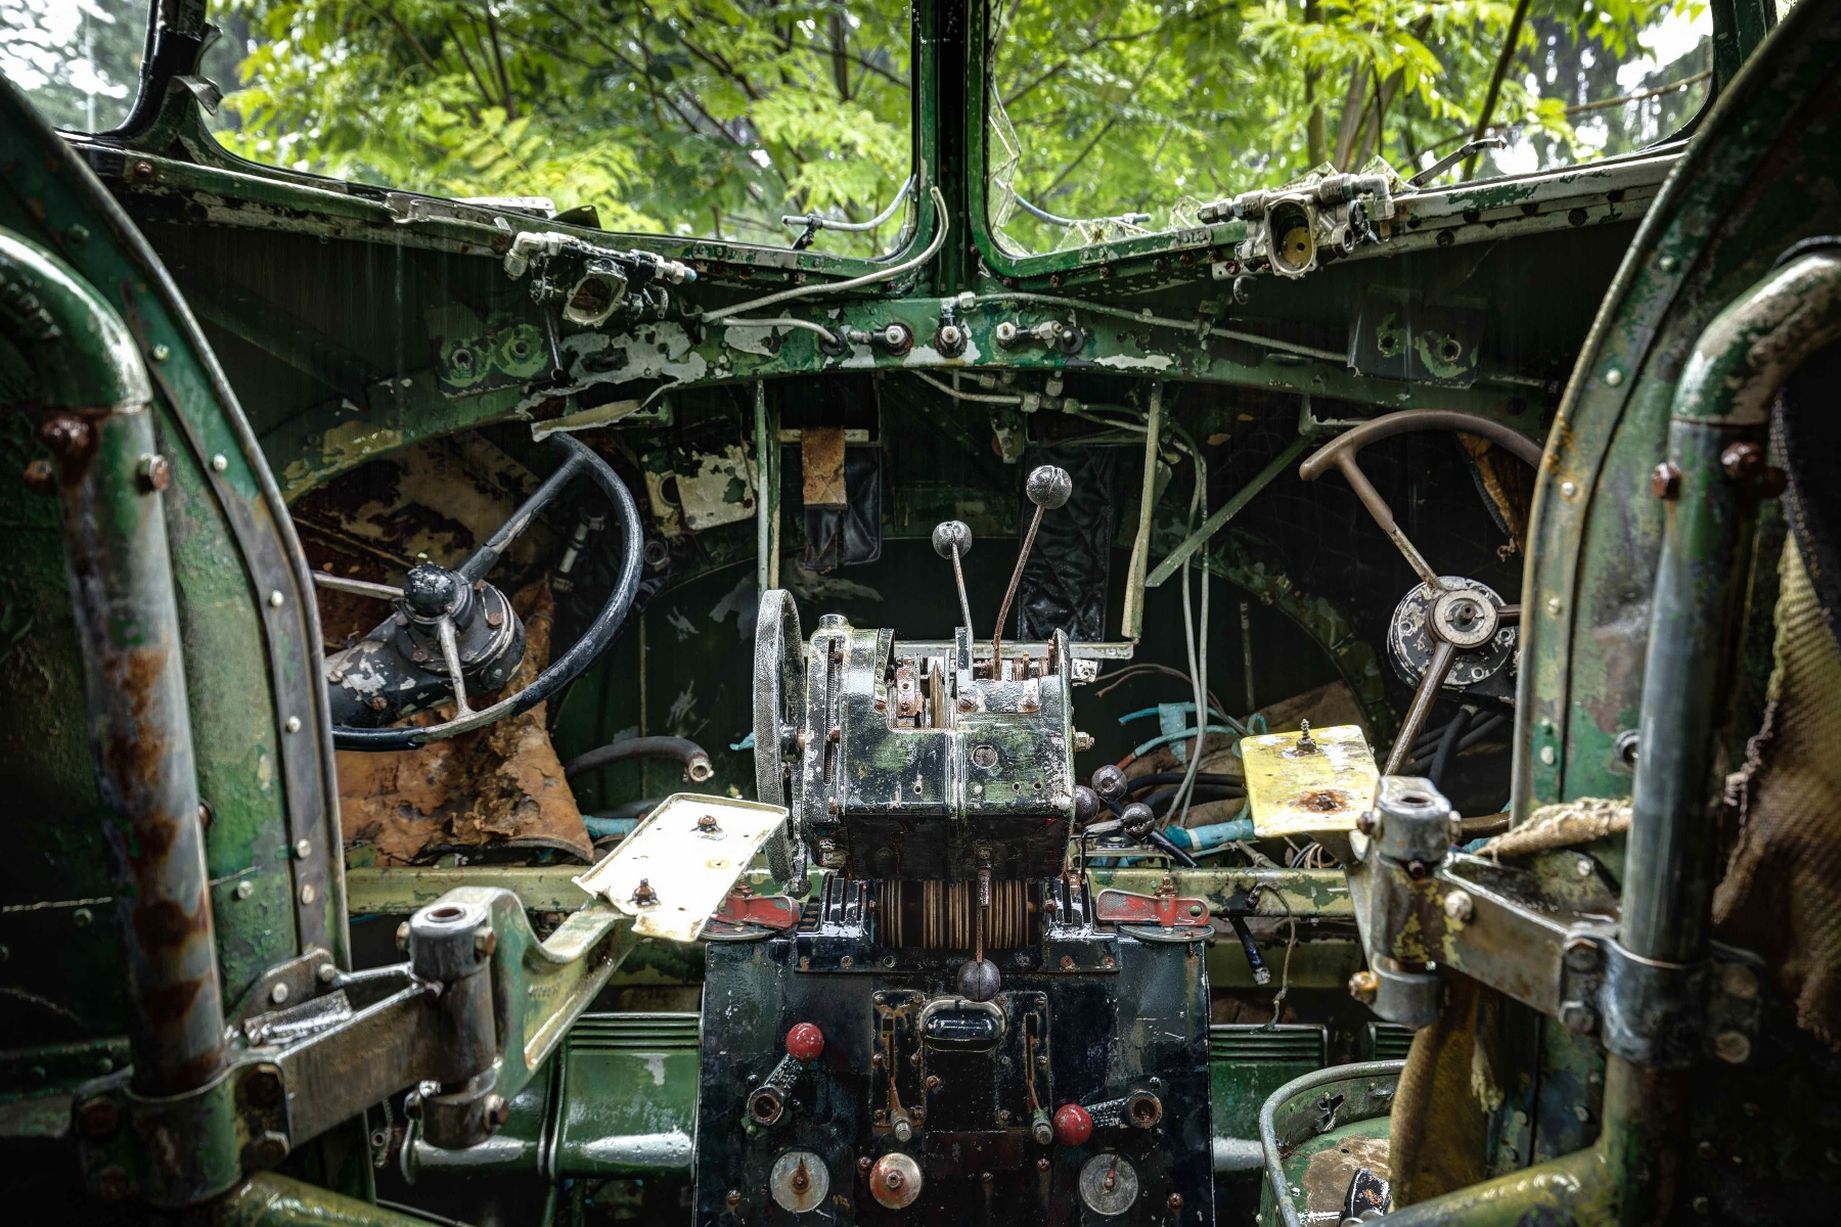 Photographer Thomas Windisch, who travelled to the site, snapped photos inside old planes